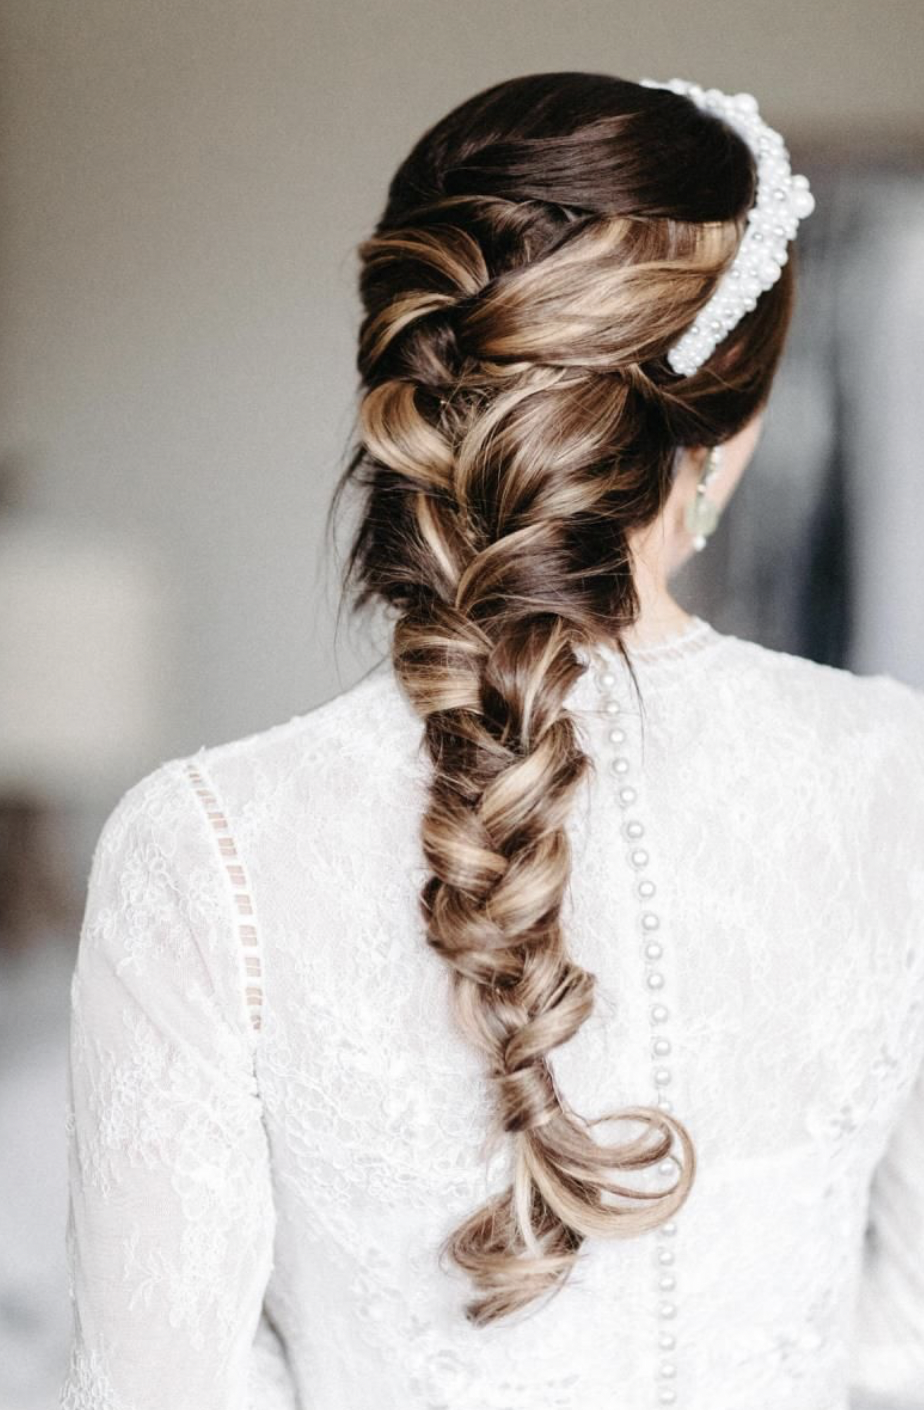 10 Hairstyles For Girls With Long Hair »Read More